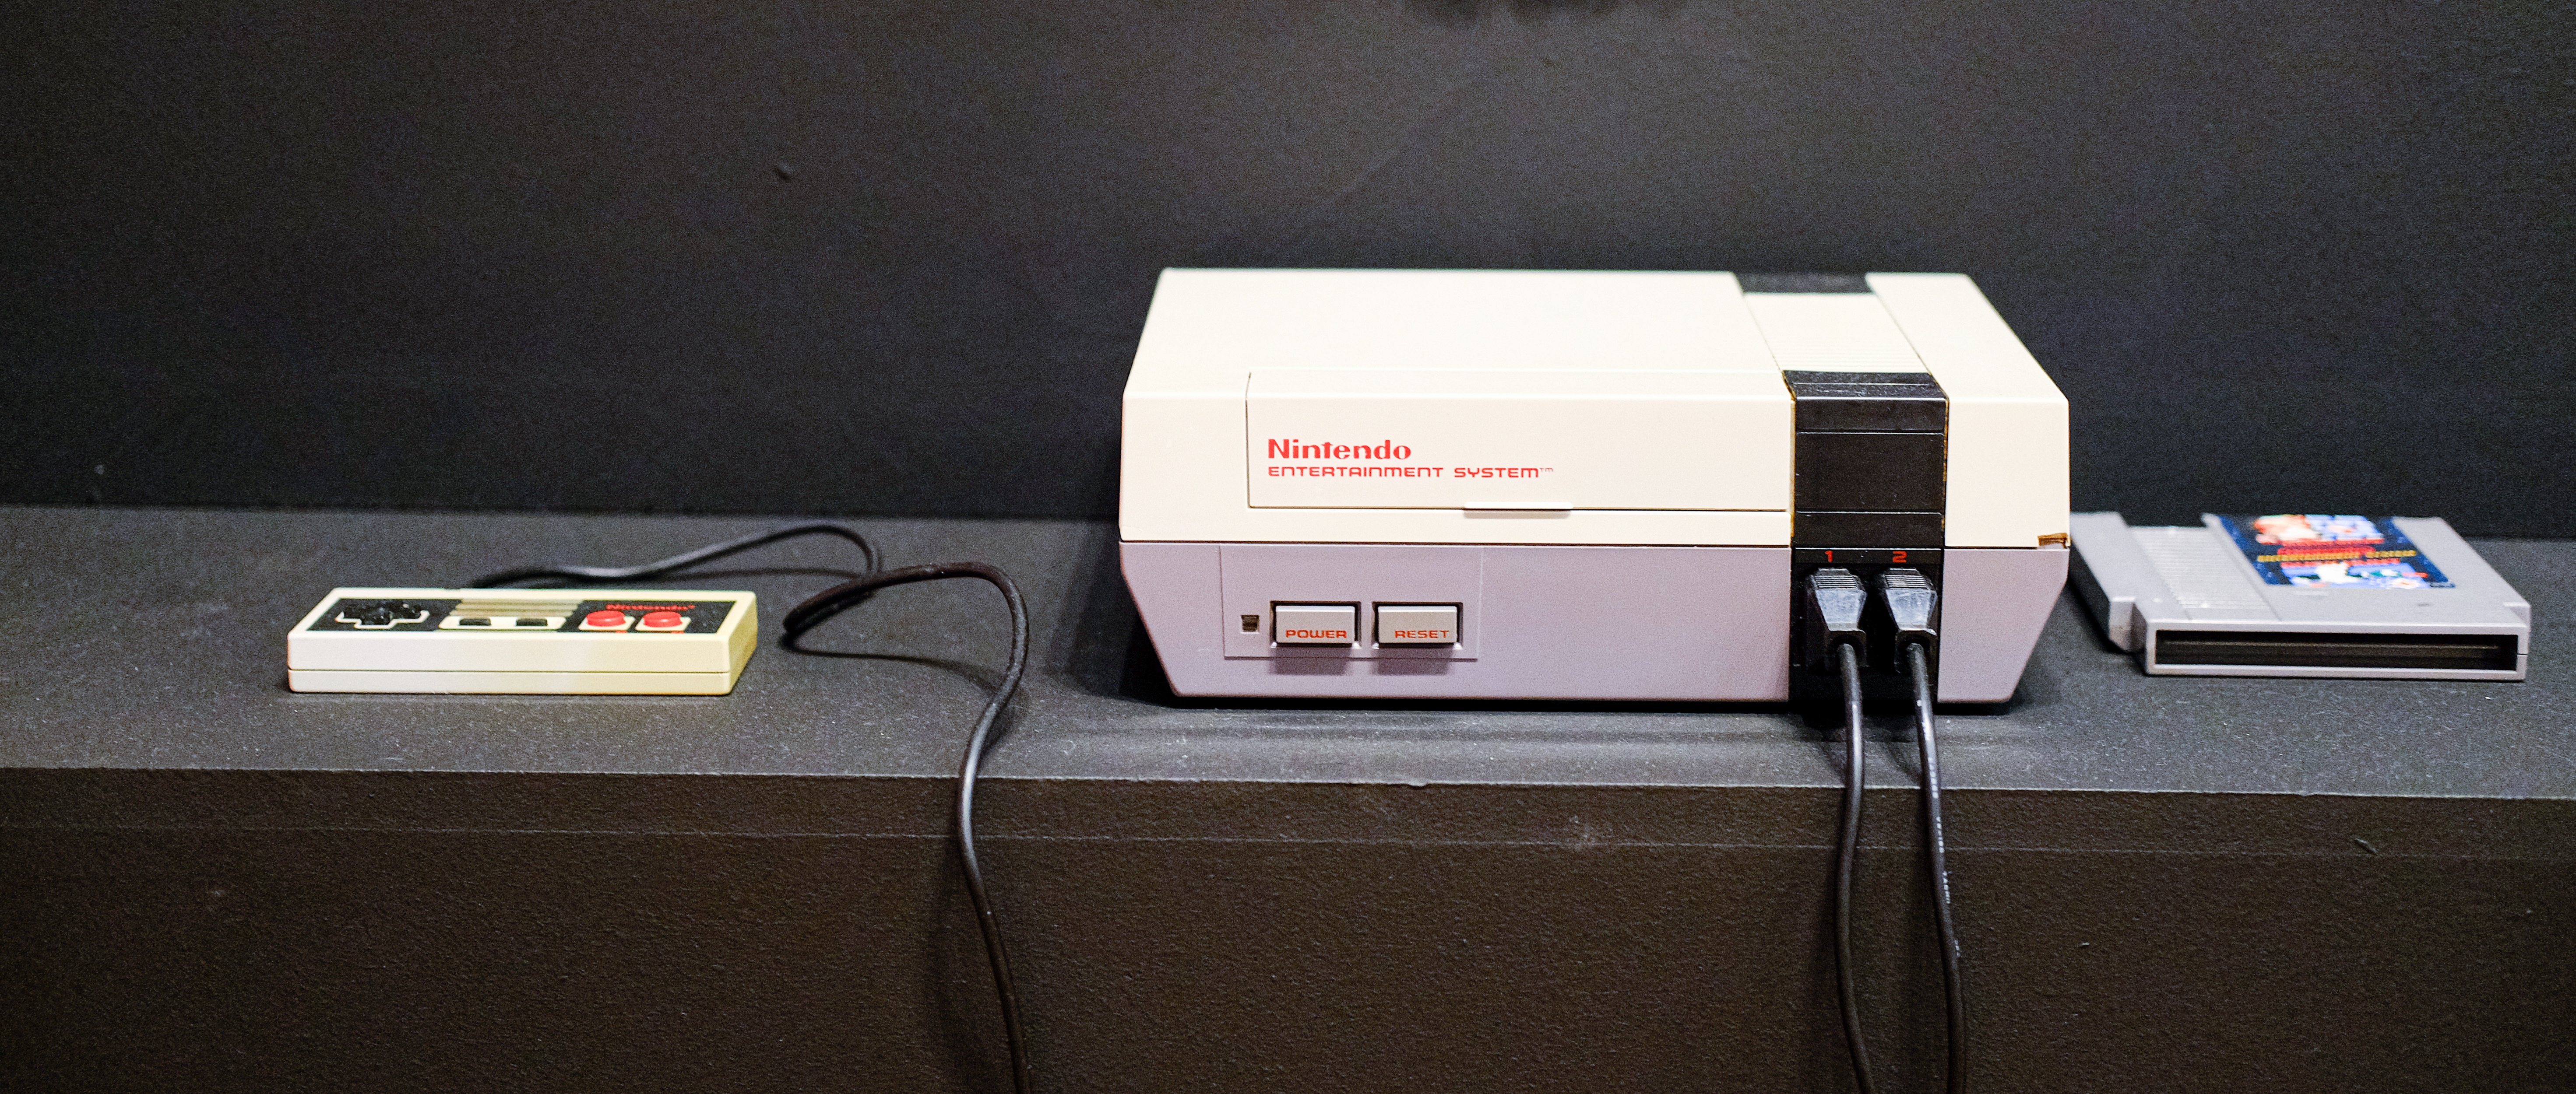 Virtually anyone can repurpose an old NES console into a working piece of retro hardware. Source: dbvirago/Adobe 